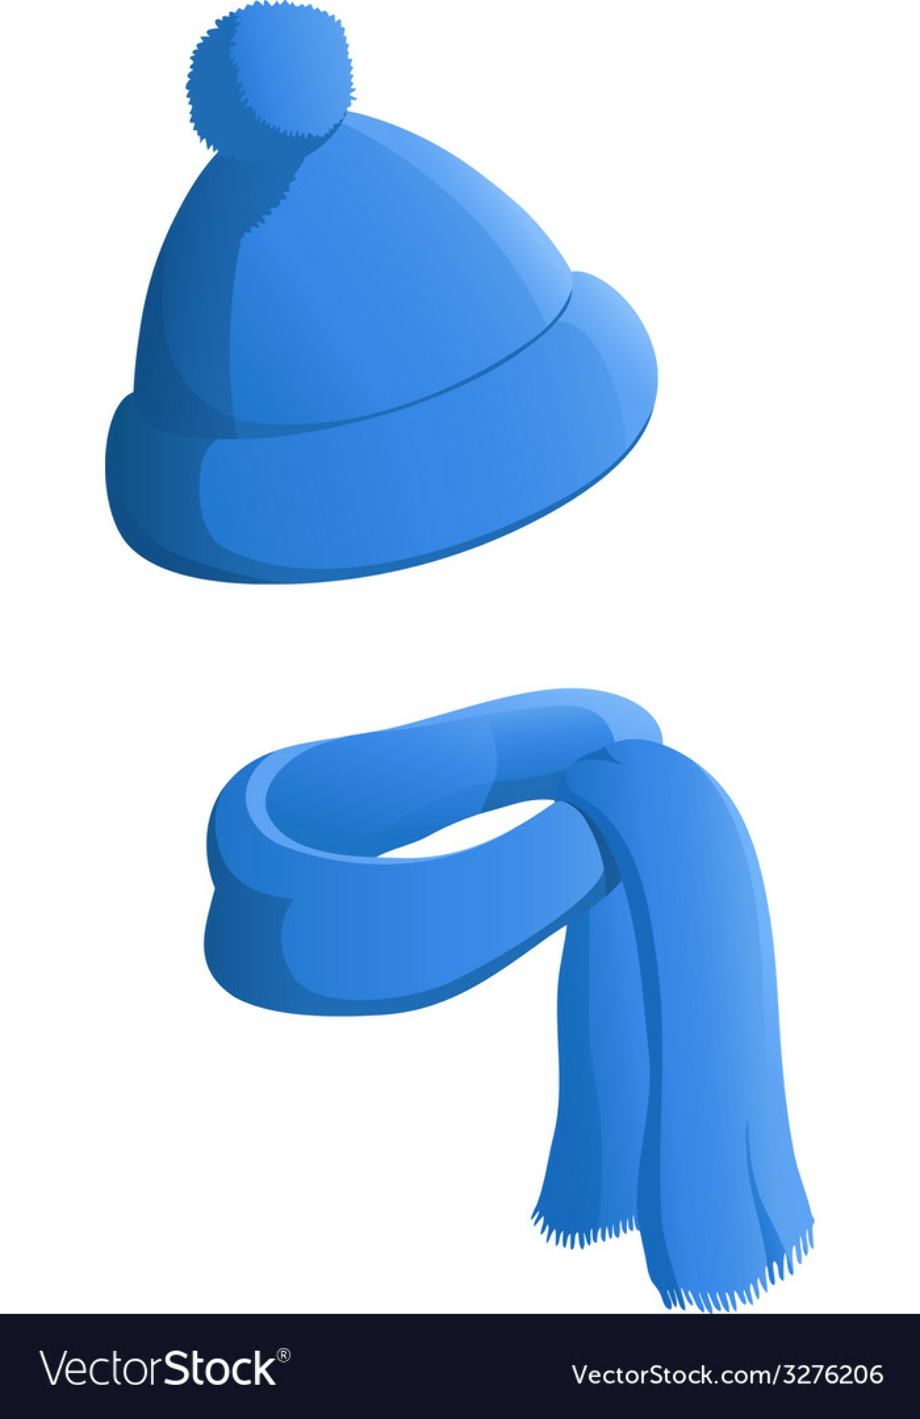 scarf clipart hat